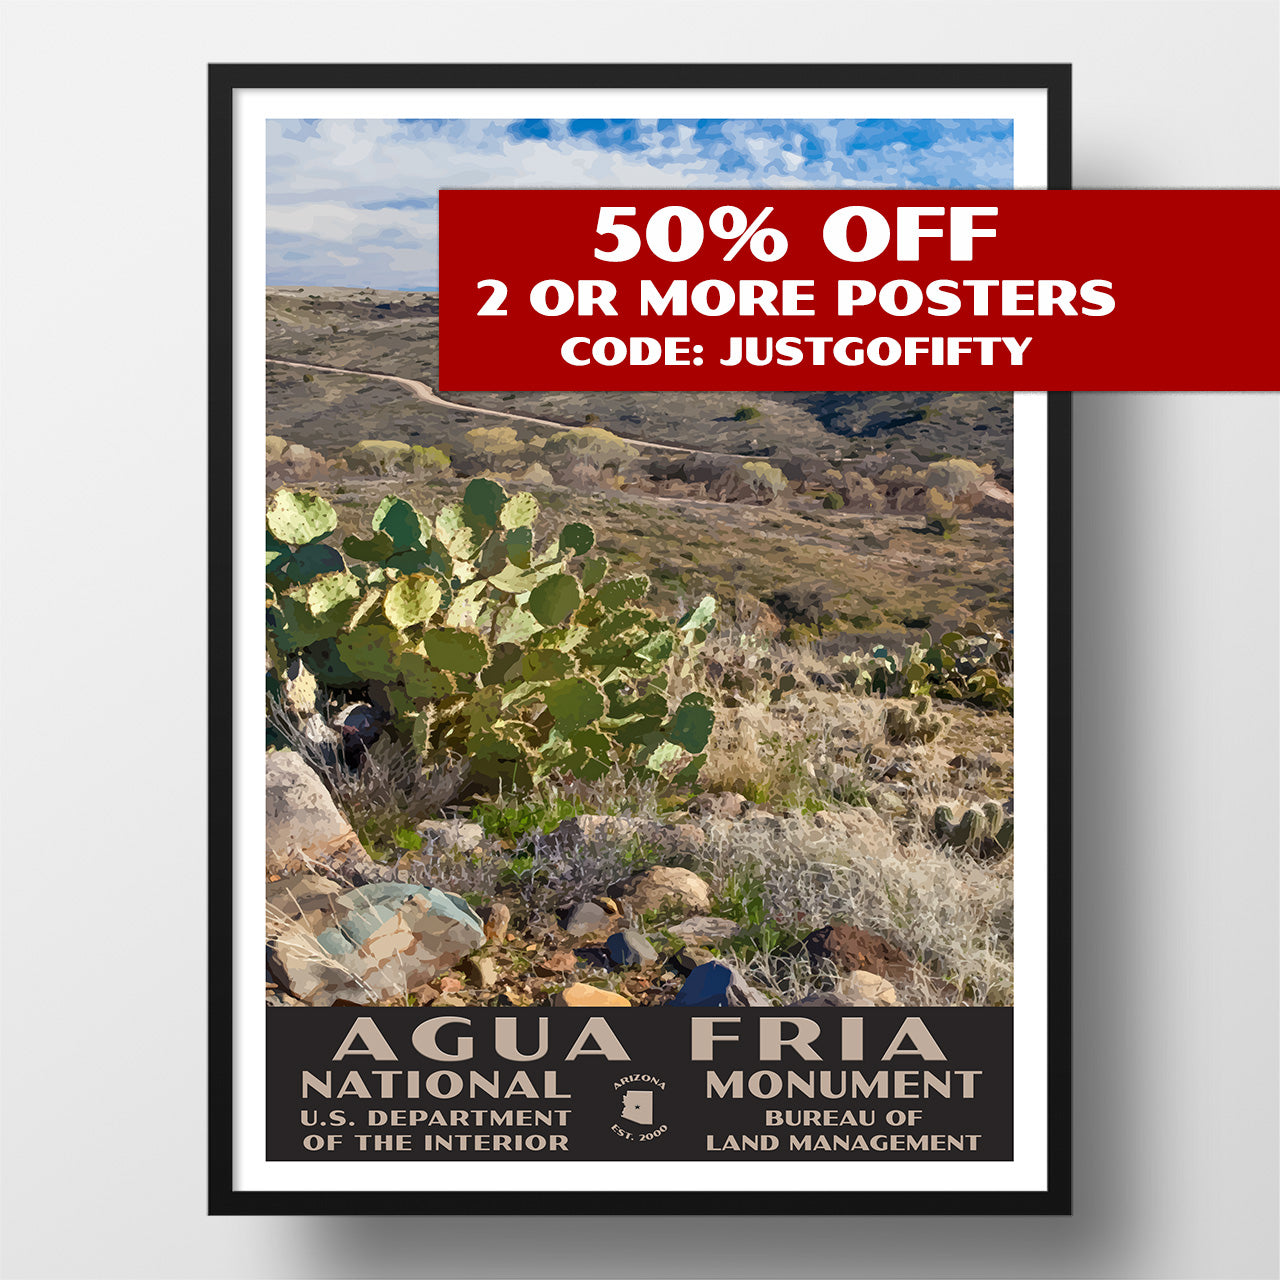 Agua Fria National Monument poster